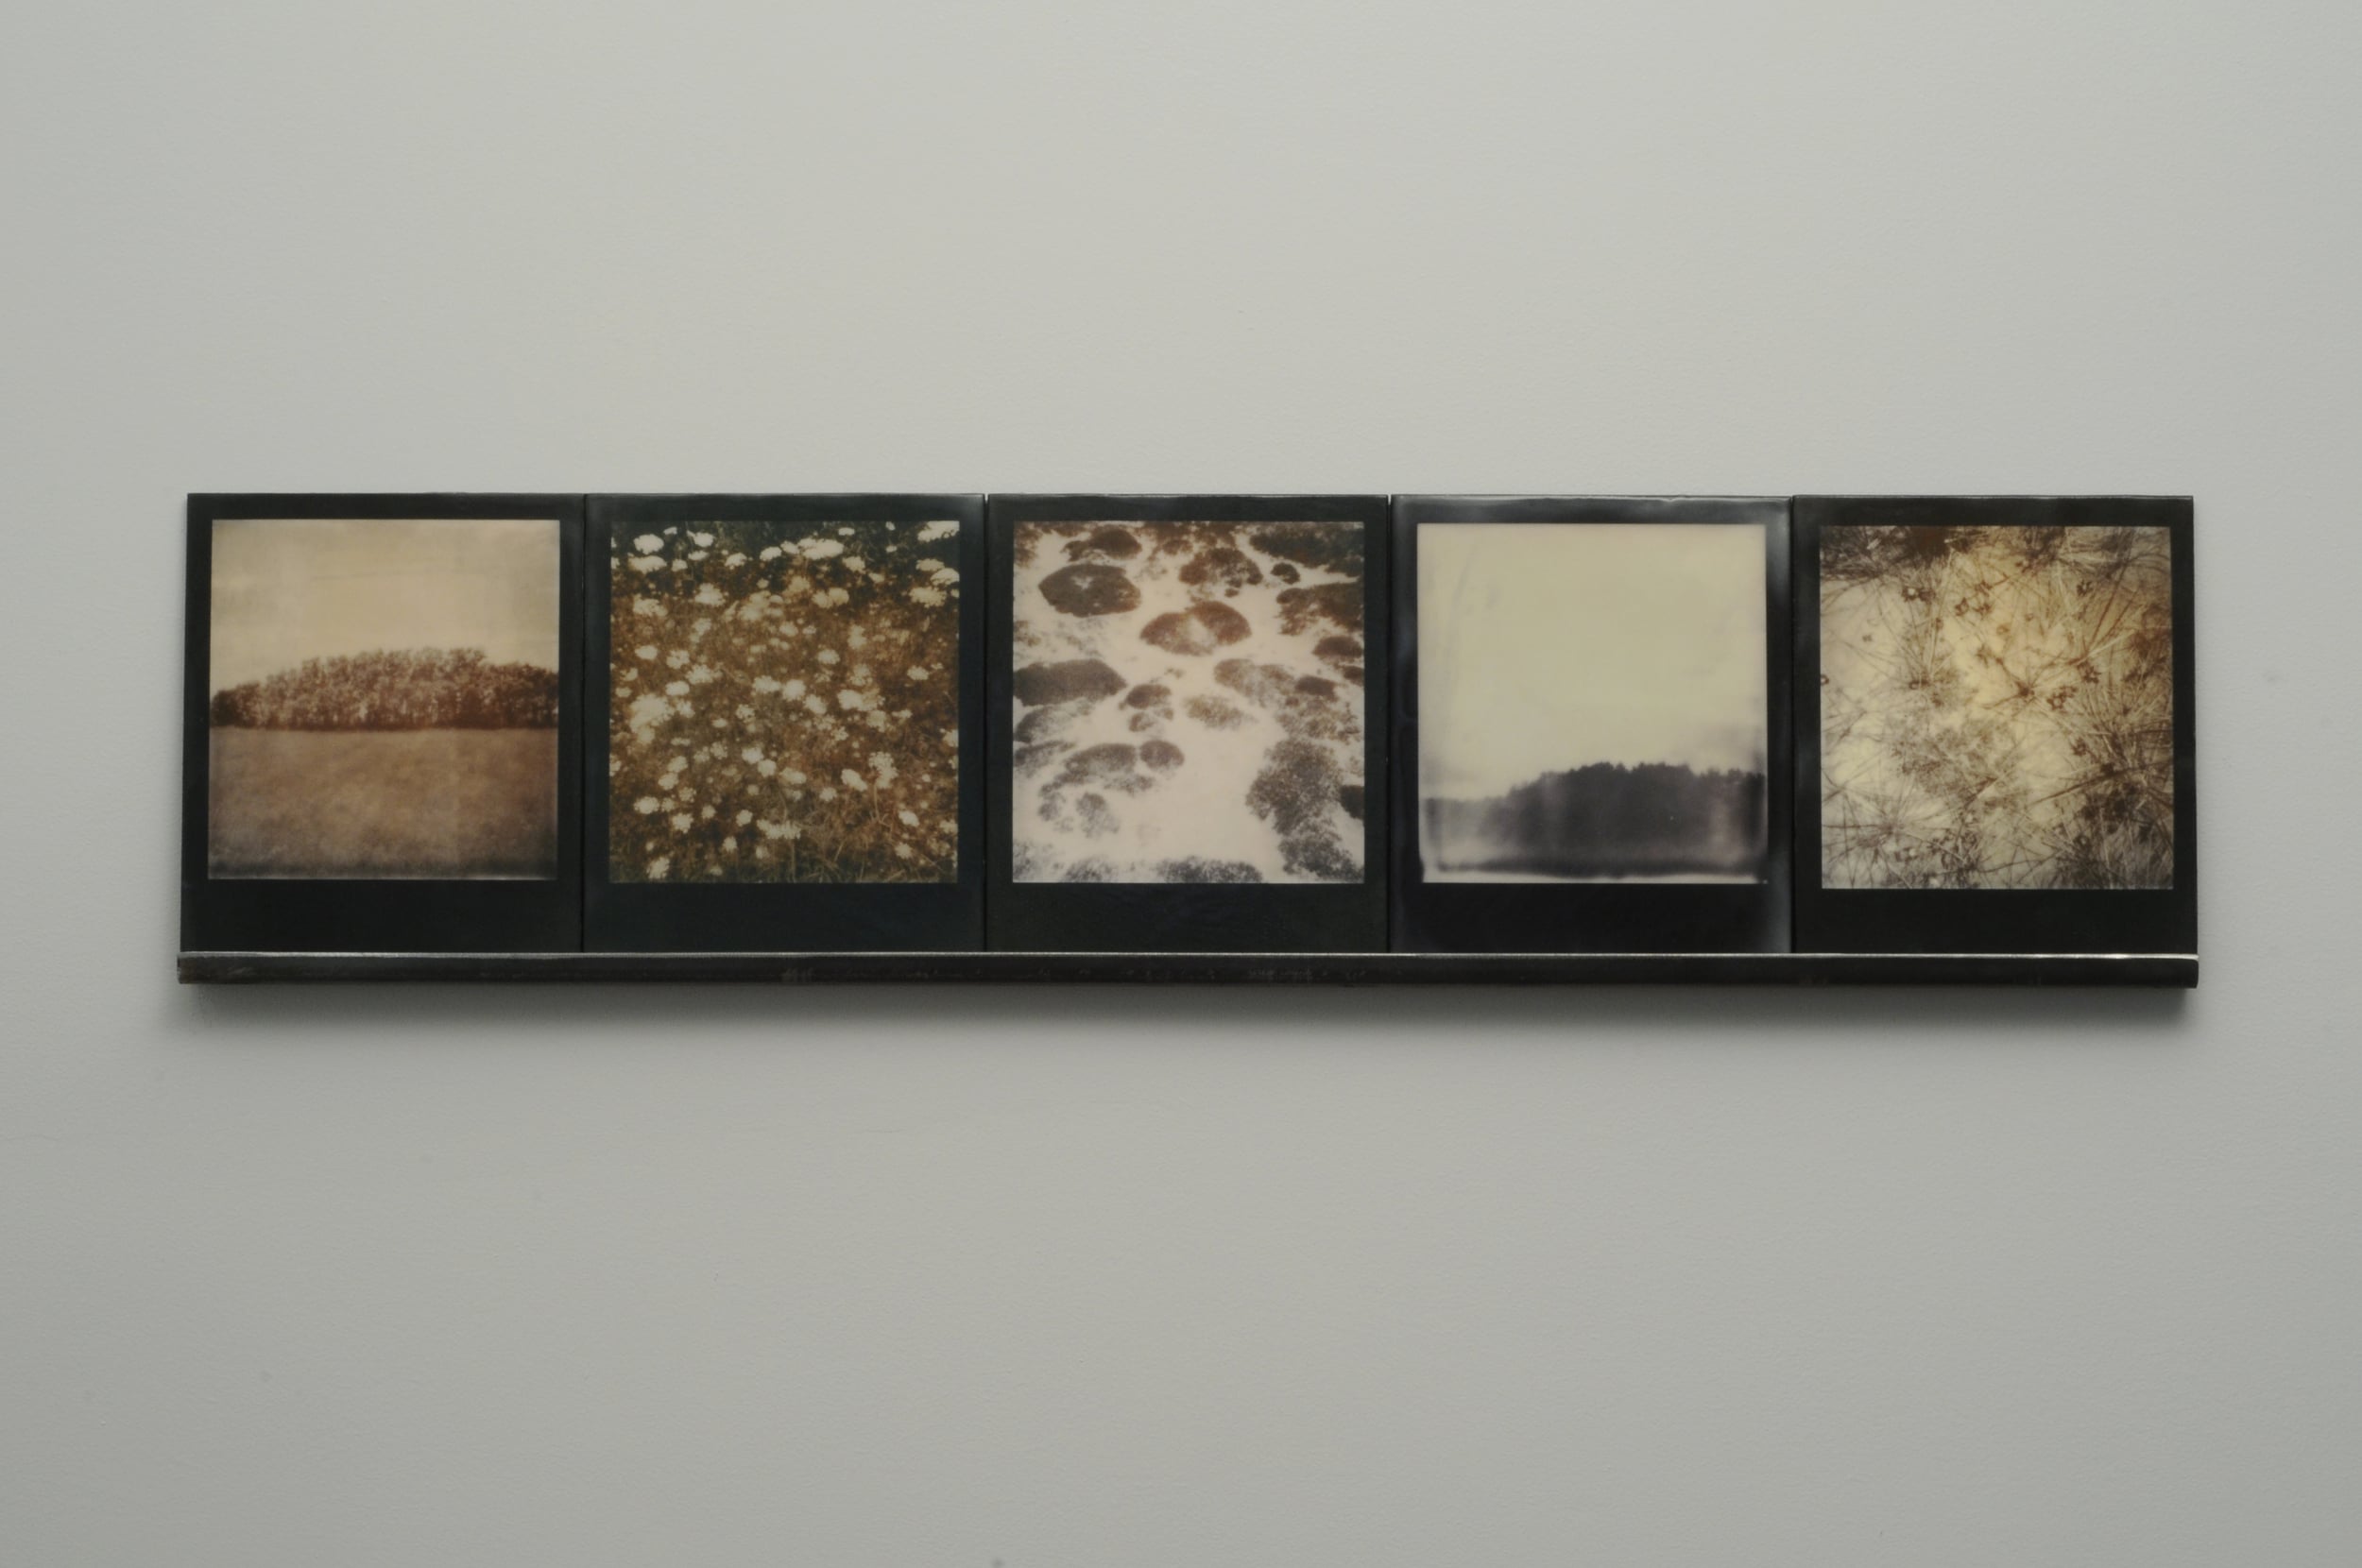    Starfall 2  , 2015, pigment prints on cotton and panel with encaustic medium and steel shelf, 8.5" x 35.25"&nbsp;&nbsp;&nbsp;&nbsp;&nbsp; variable edition of 2 and 1 artist proof 